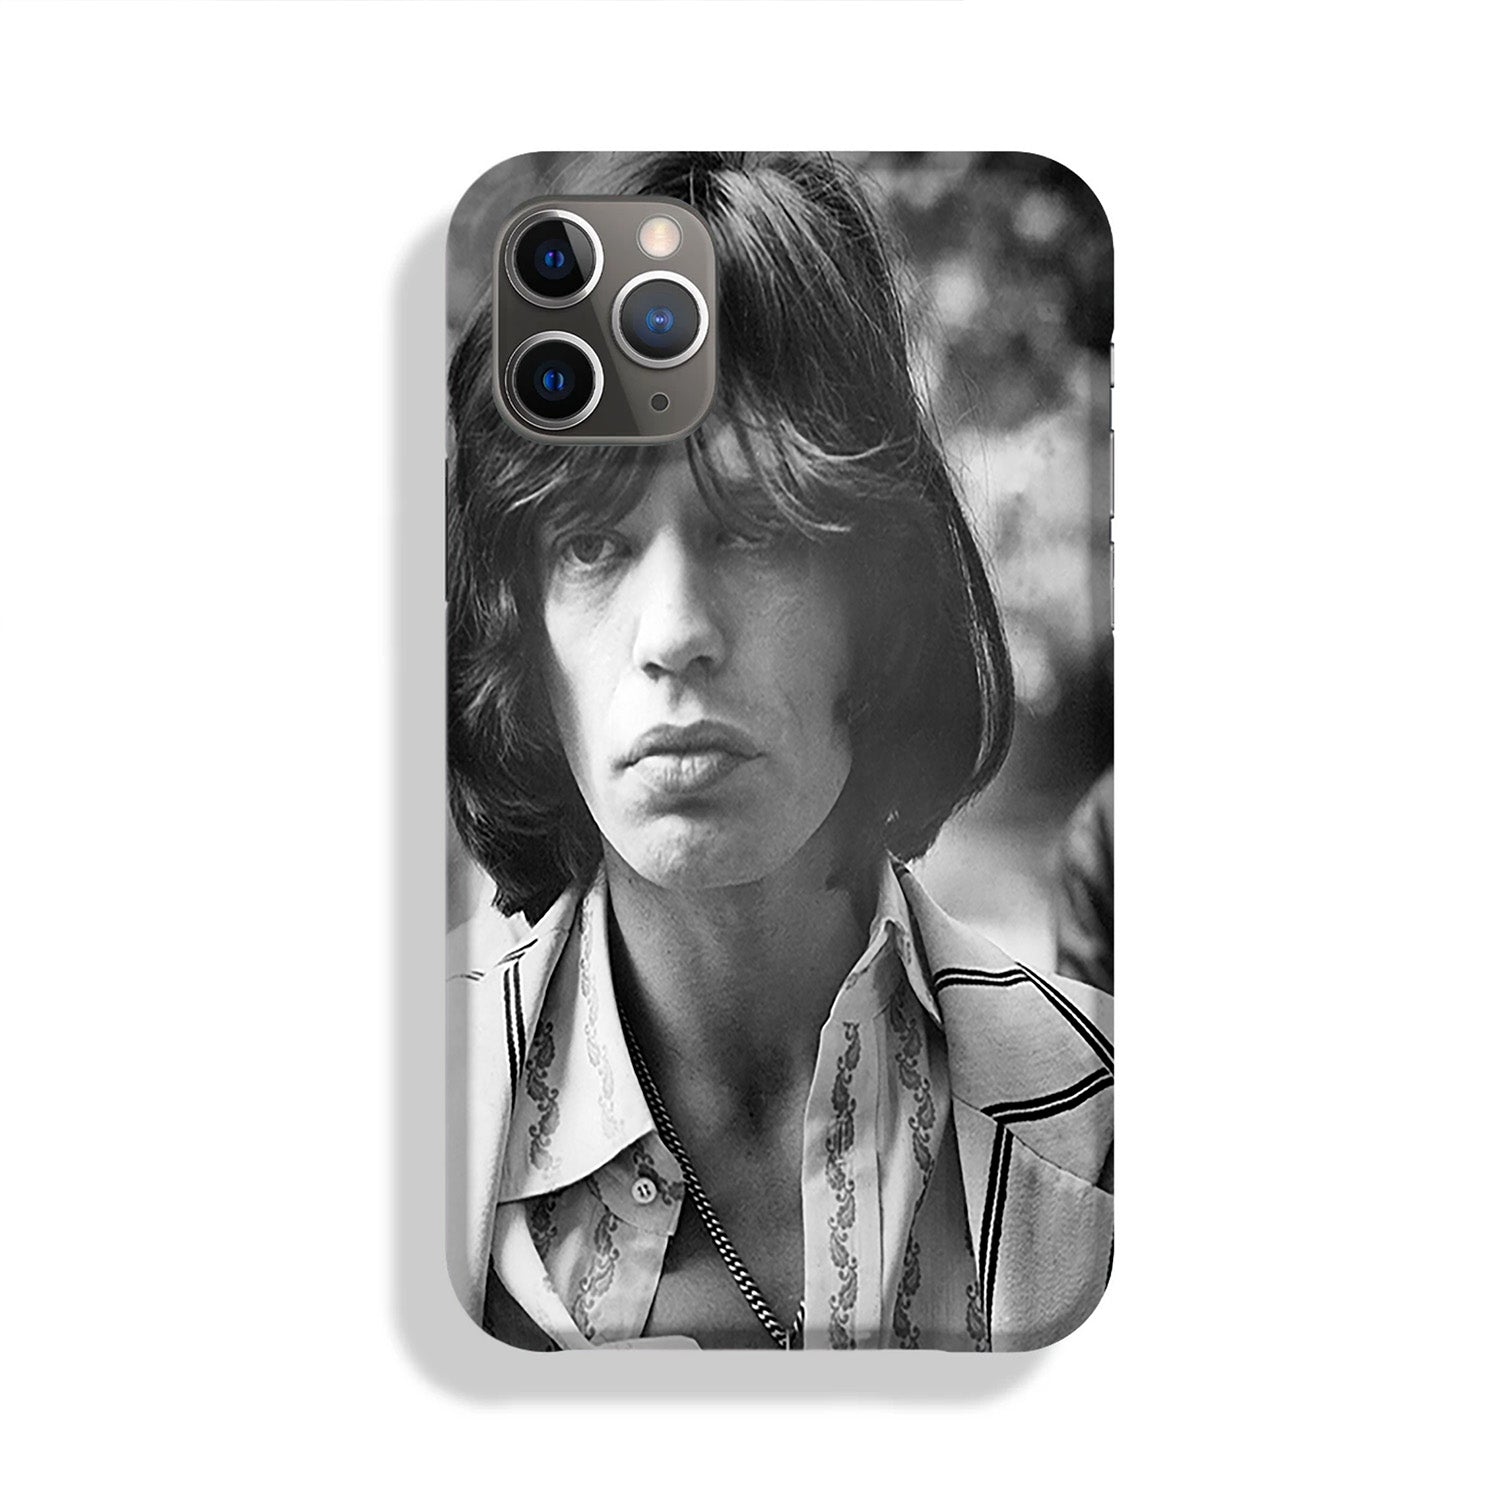 Mick Jagger in 1969 Phone Case iPhone 11 Pro